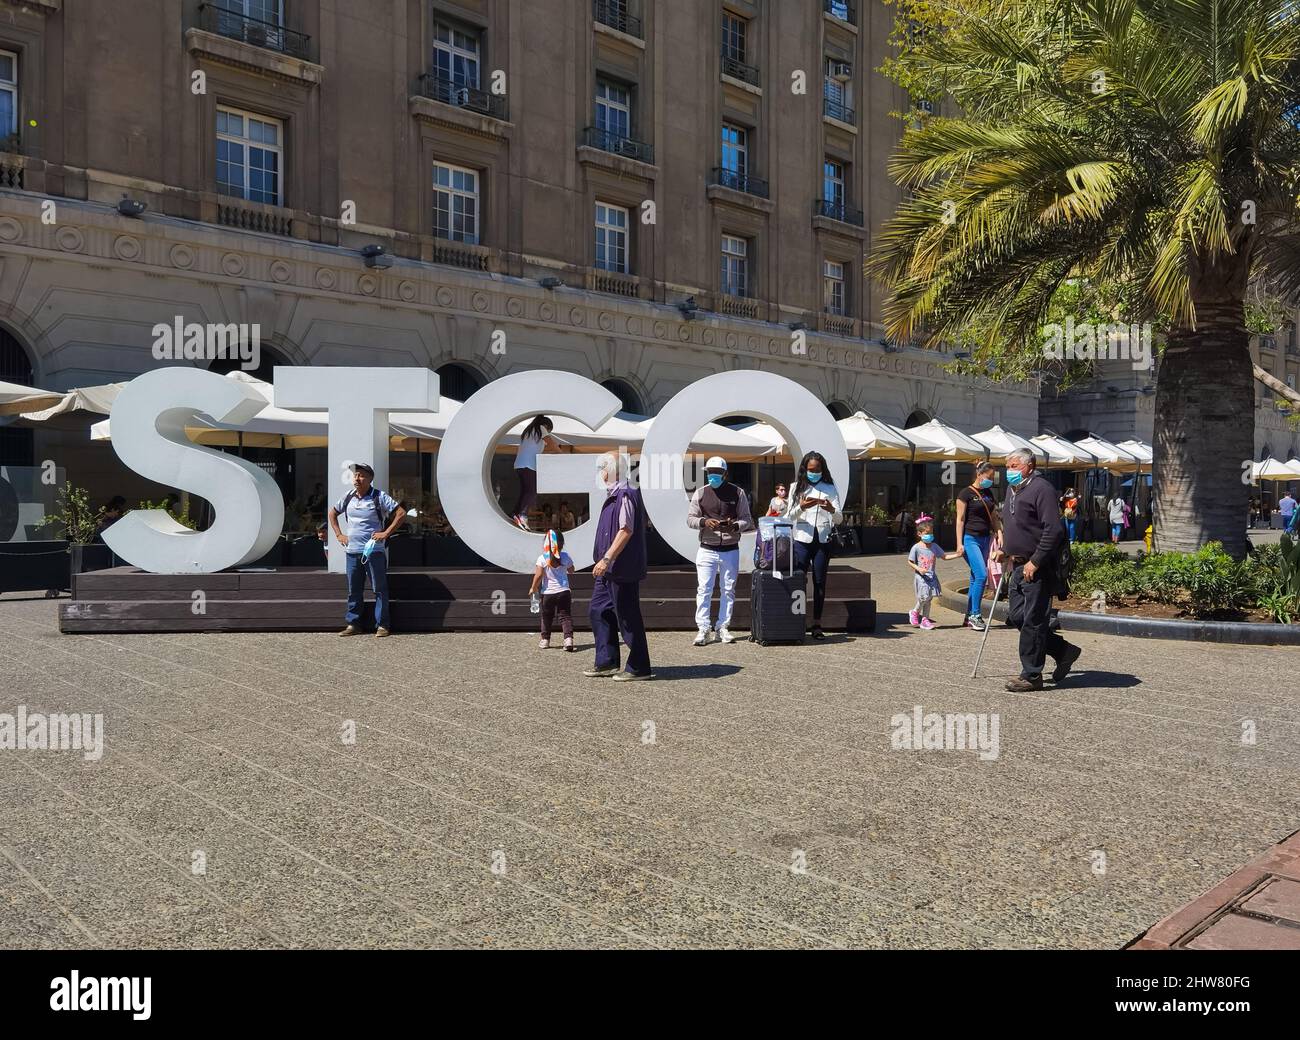 Santiago, Chile - Sep 24, 2021: People at the main square. City big letters. Stock Photo